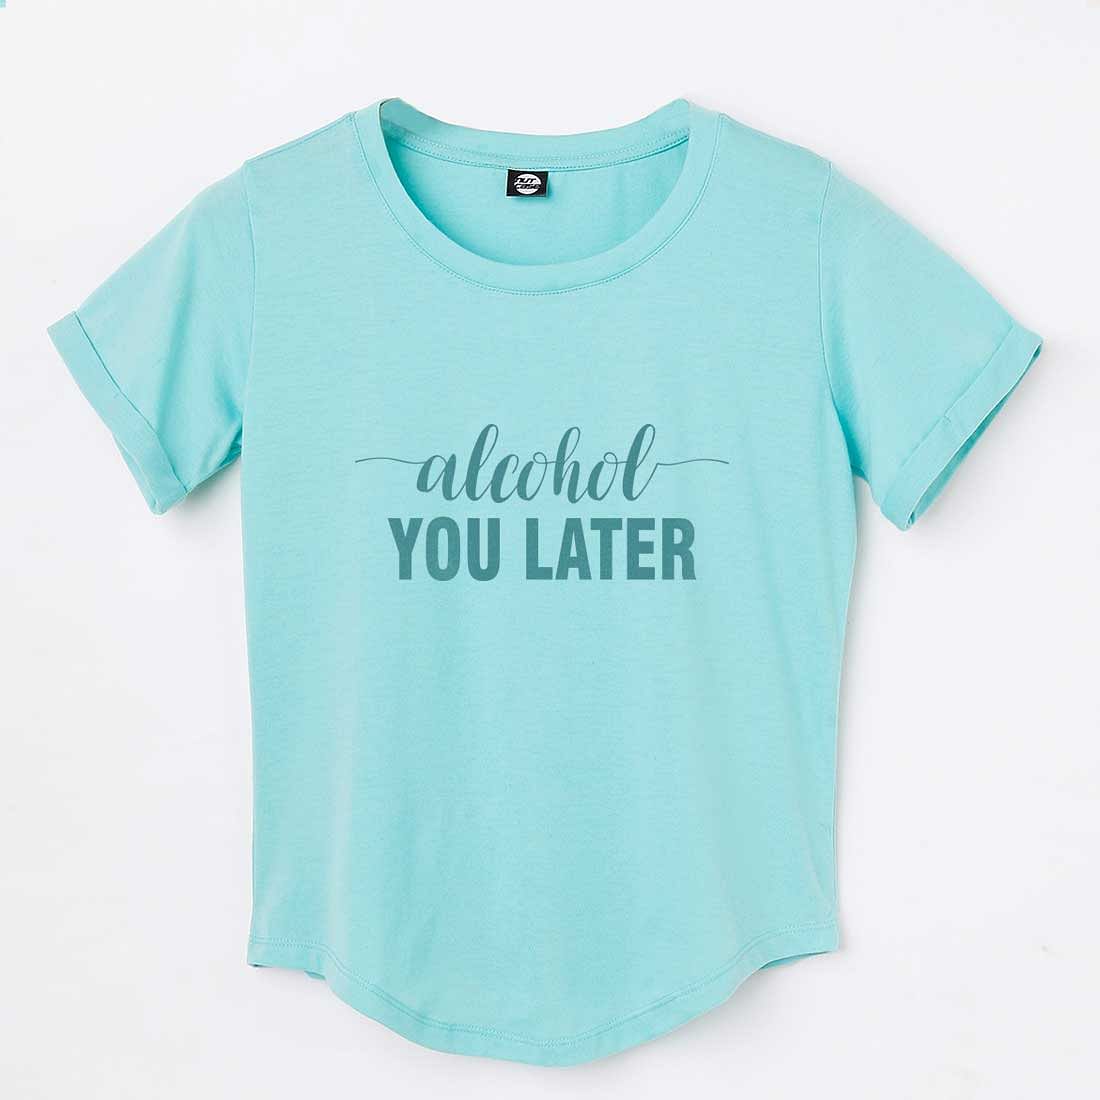 Funny Booze Drinks Tshirt For Women  - Alcohol You Later Nutcase